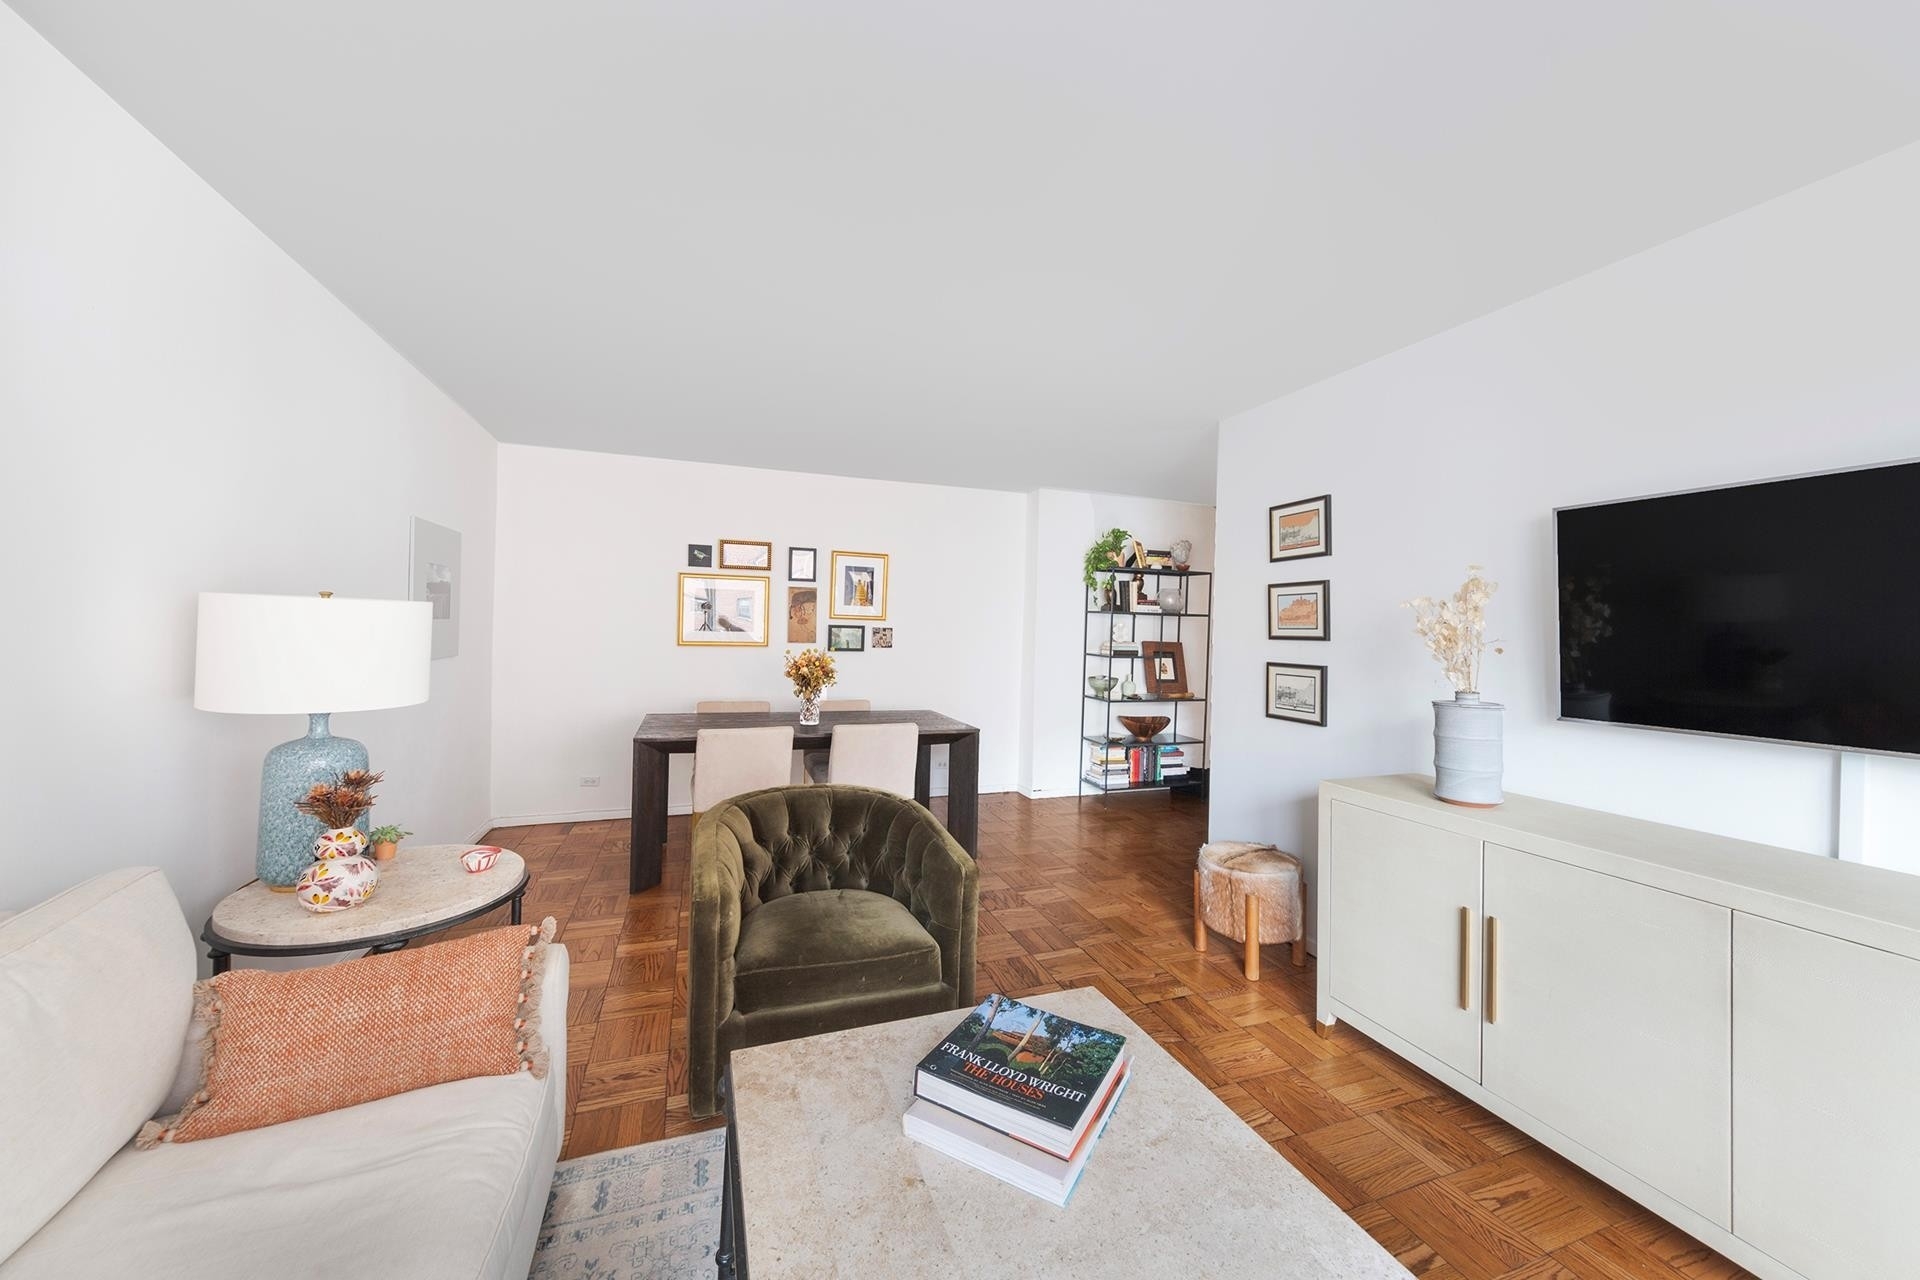 Co-op Properties for Sale at 174 E 74TH ST, 11D Lenox Hill, New York, New York 10021